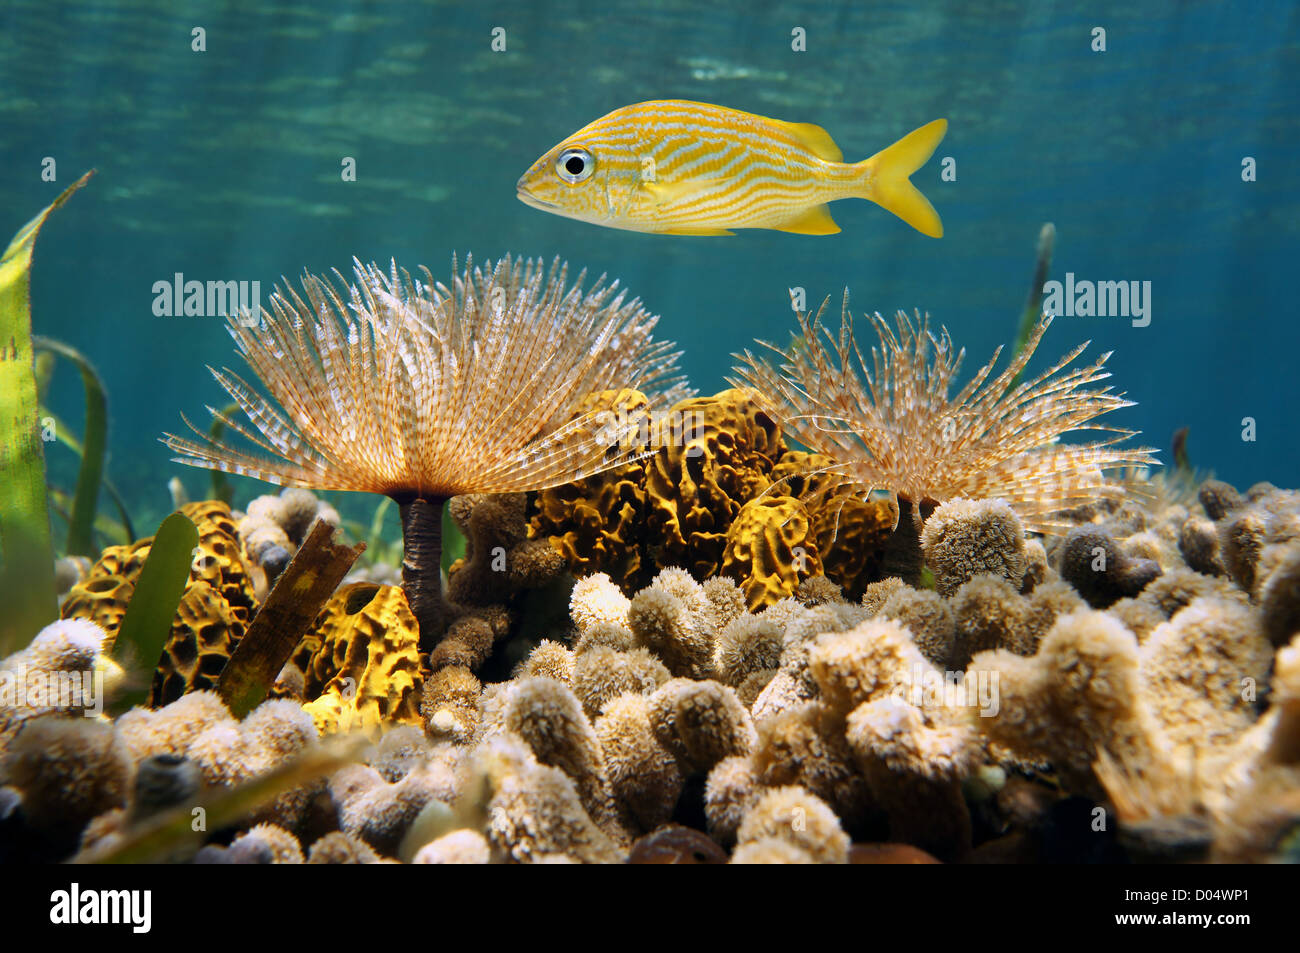 French grunt fish with feather duster worms, tube sponge and coral underwater in the Caribbean sea Stock Photo